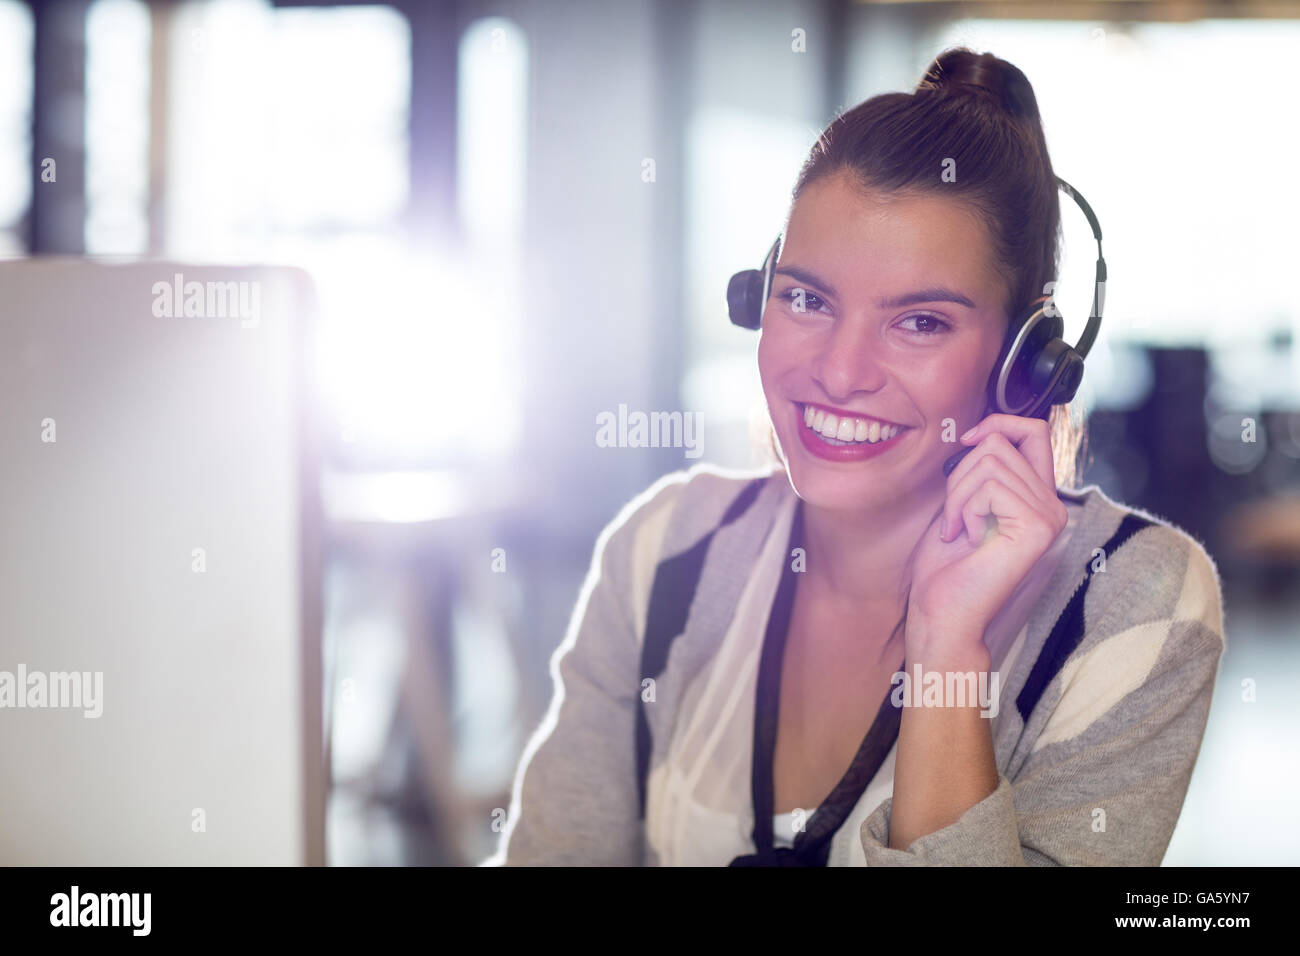 Portrait of woman with headphones in office Stock Photo